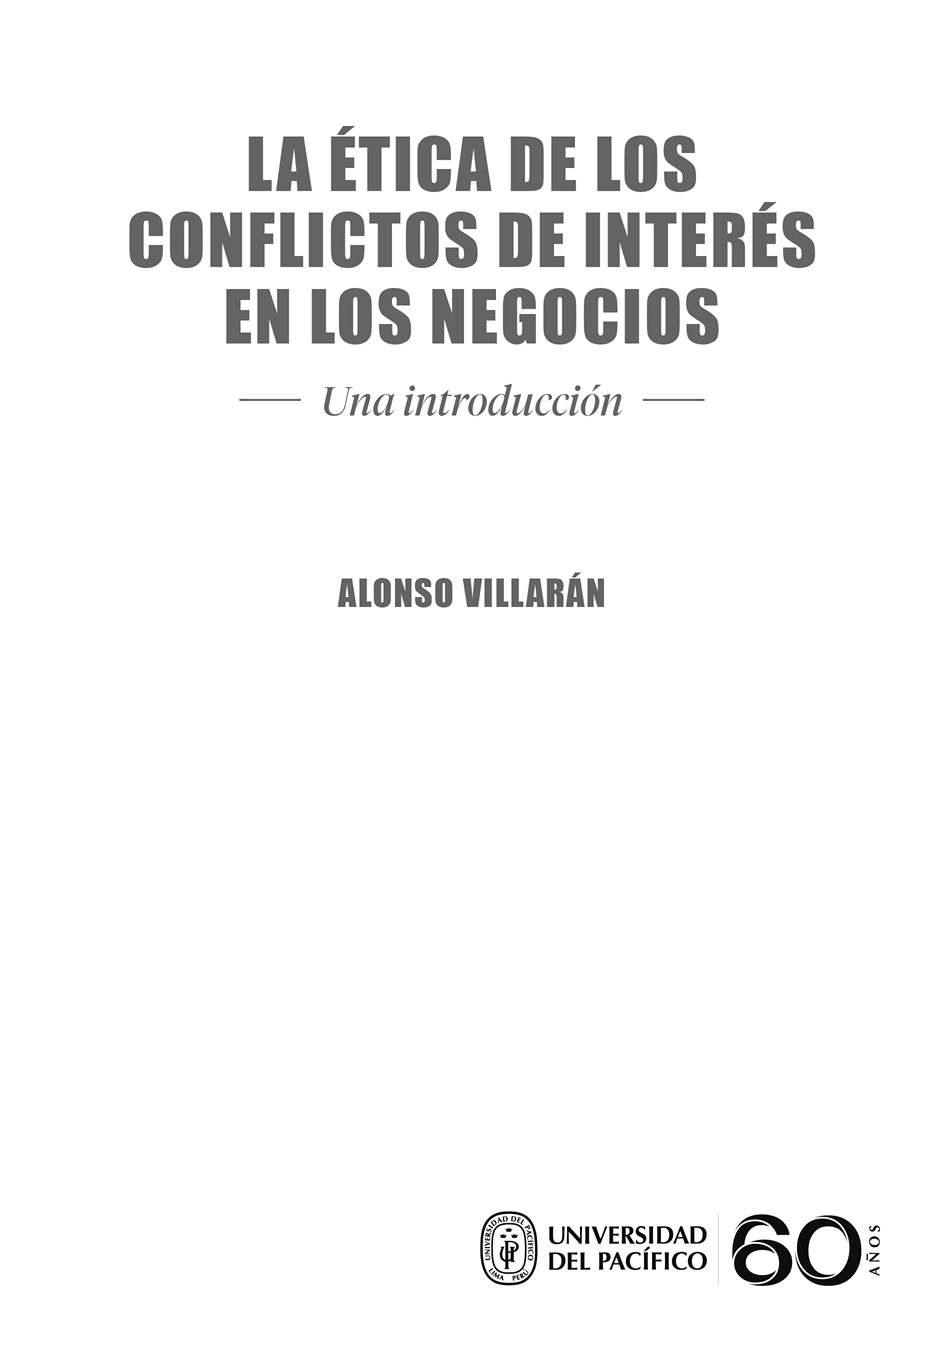 Título original en inglés The ethics of conflicts of interest in business - photo 2